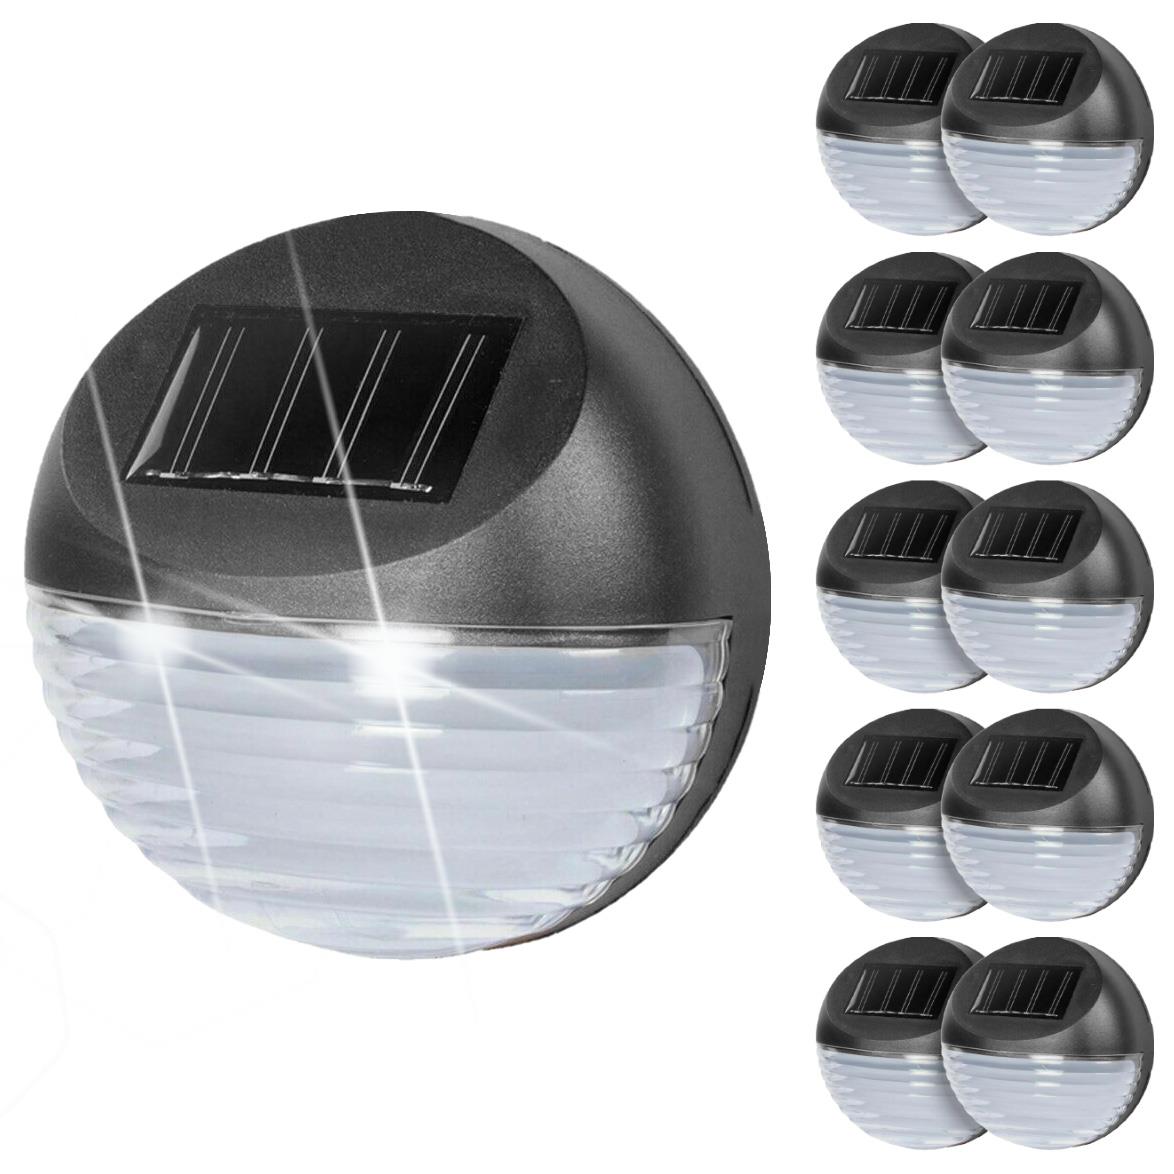 10x Solar LED Fence Lights Black by GEEZY - The Magic Toy Shop